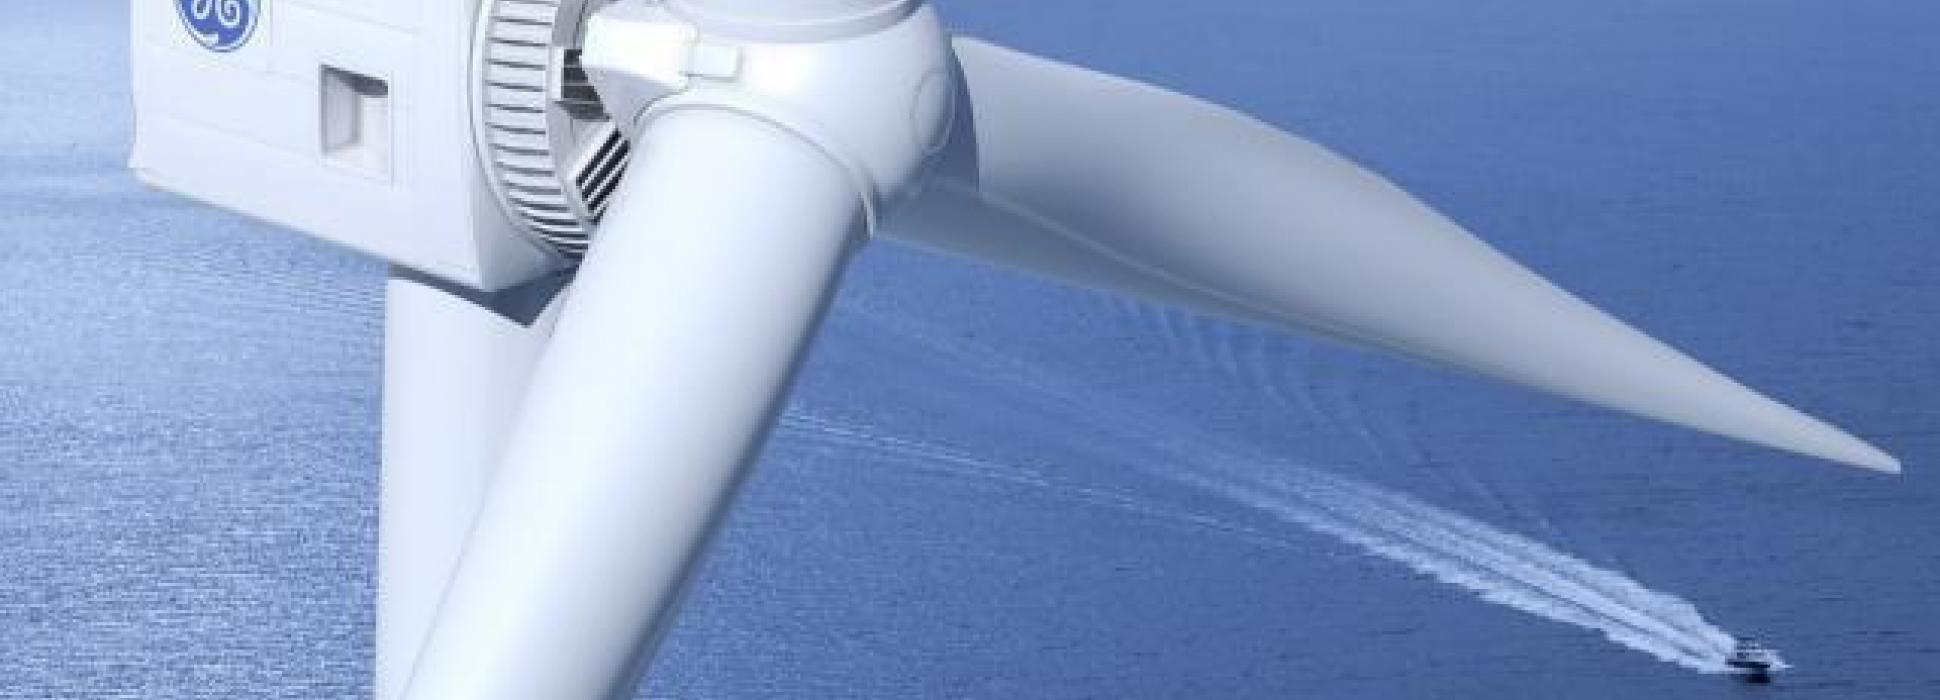 The world's most powerful offshore wind turbine was unveiled on July 12 in Saint-Nazaire